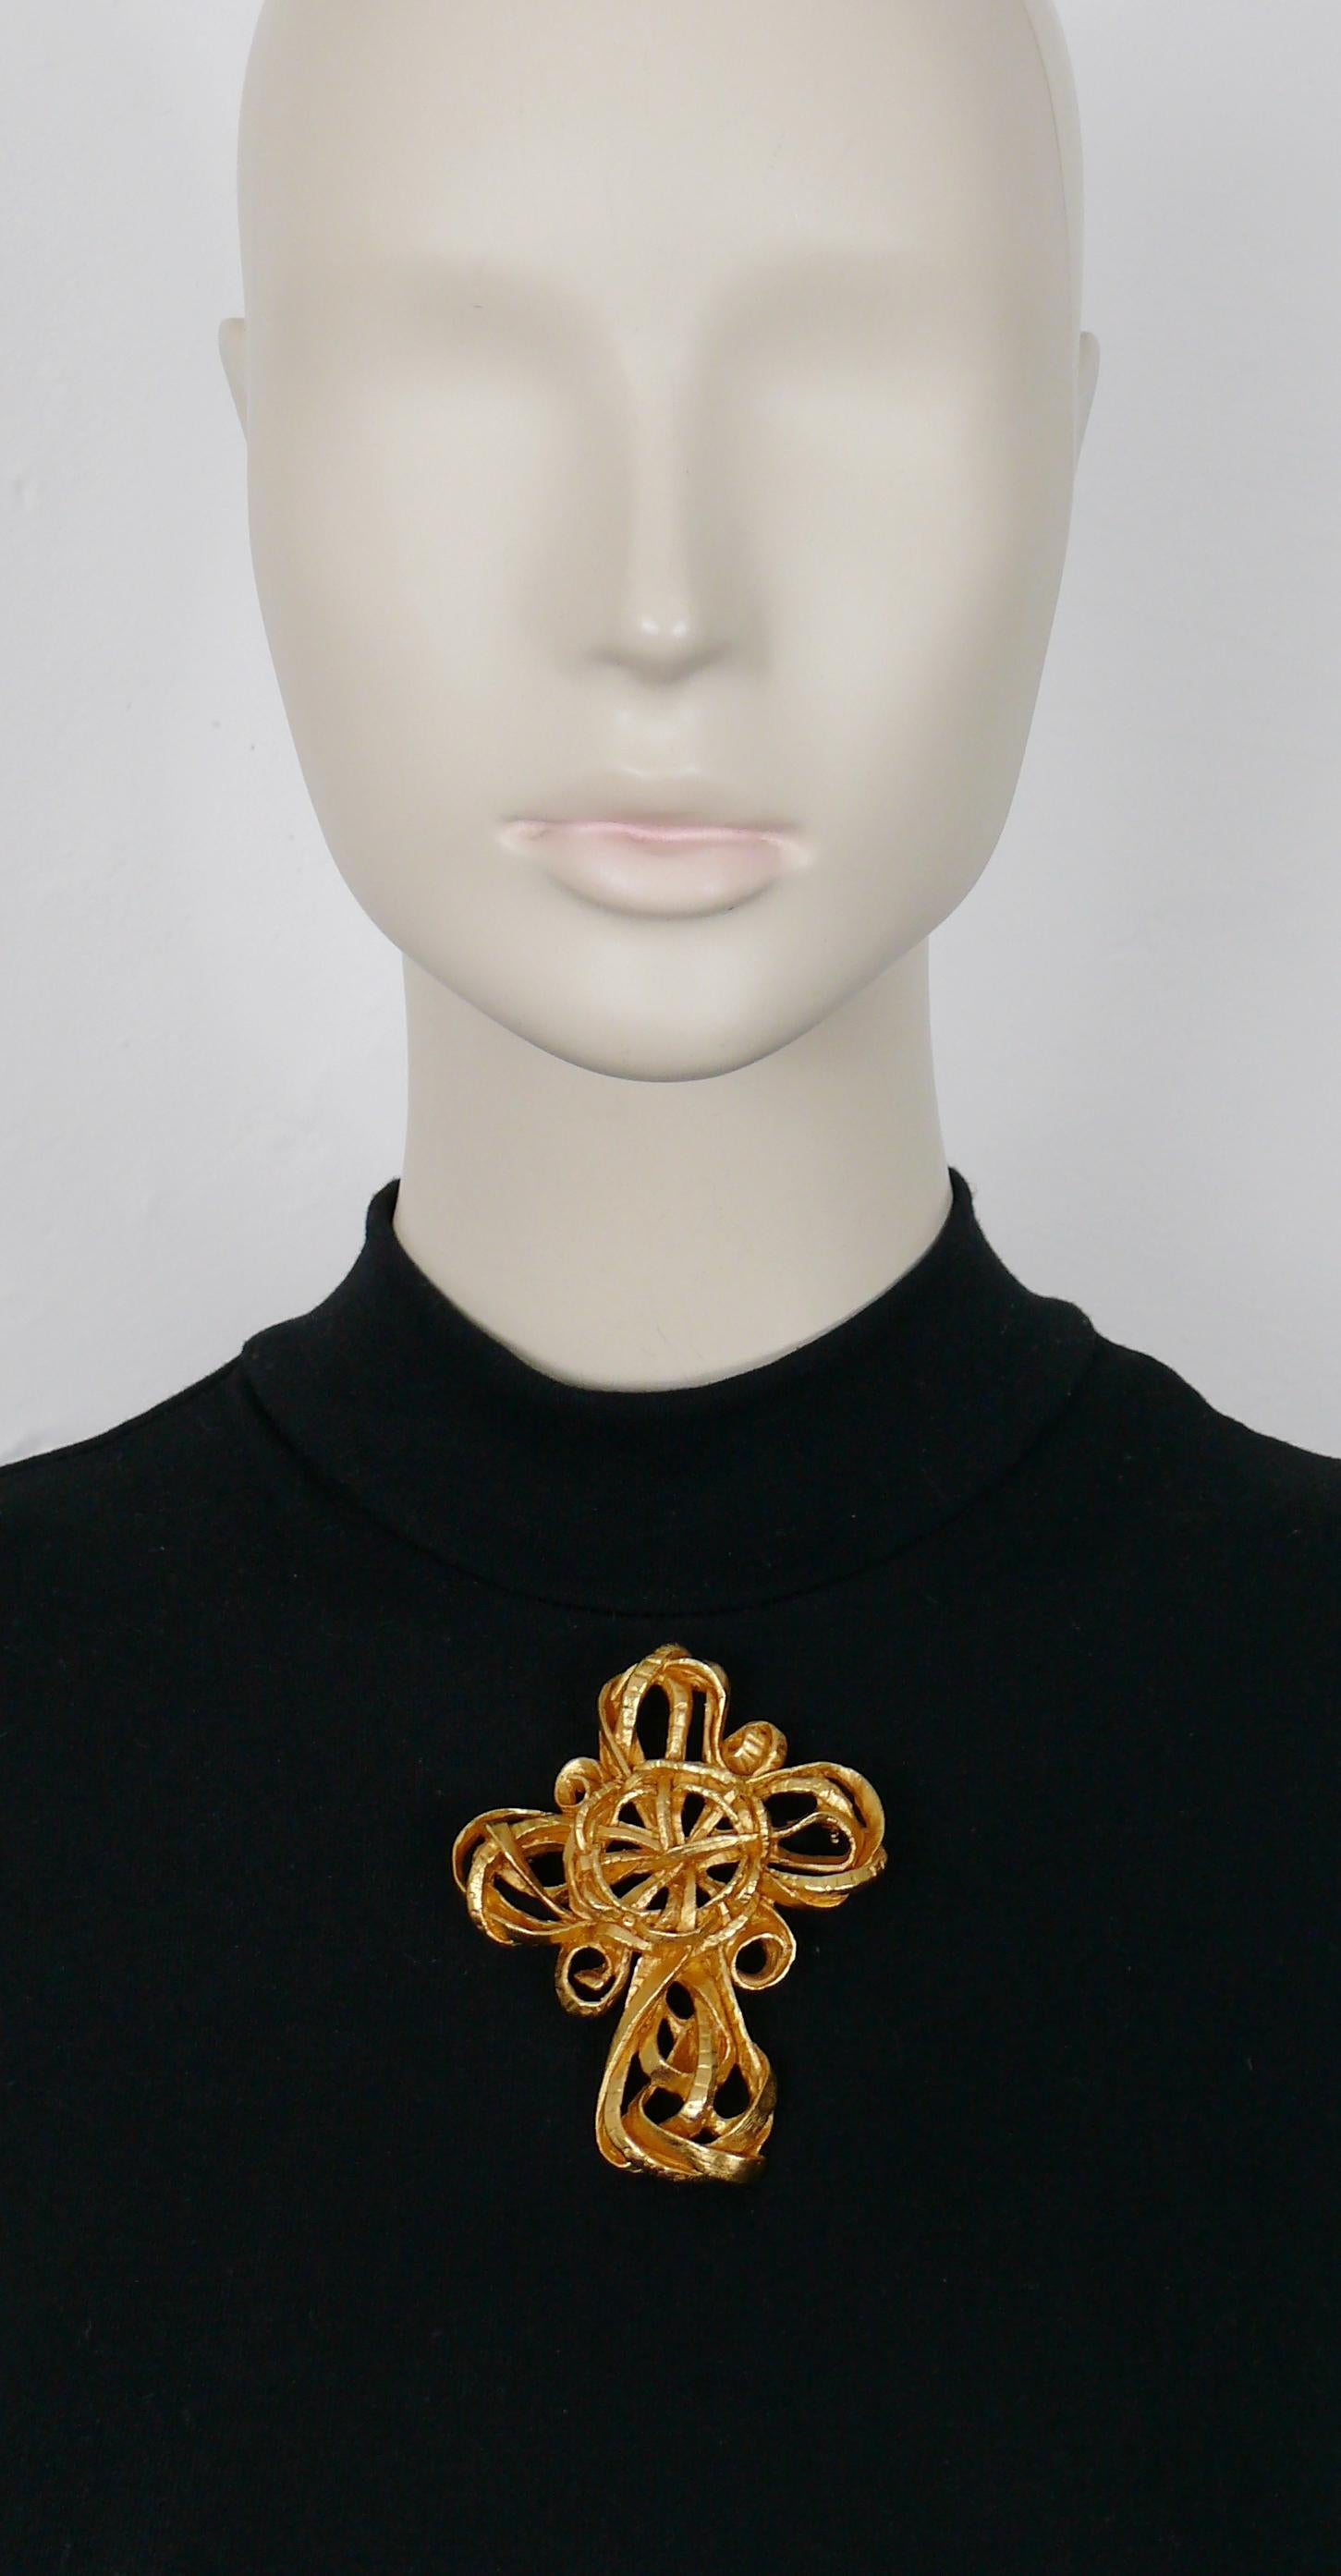 CHRISTIAN LACROIX vintage massive gold toned cross brooch/pendant in openwork torsade pattern.

Could be used as a brooch or pendant.

Marked CHRISTIAN LACROIX CL Made in France.

Indicative measurements : height approx. 8.5 cm (3.35 inches) / width